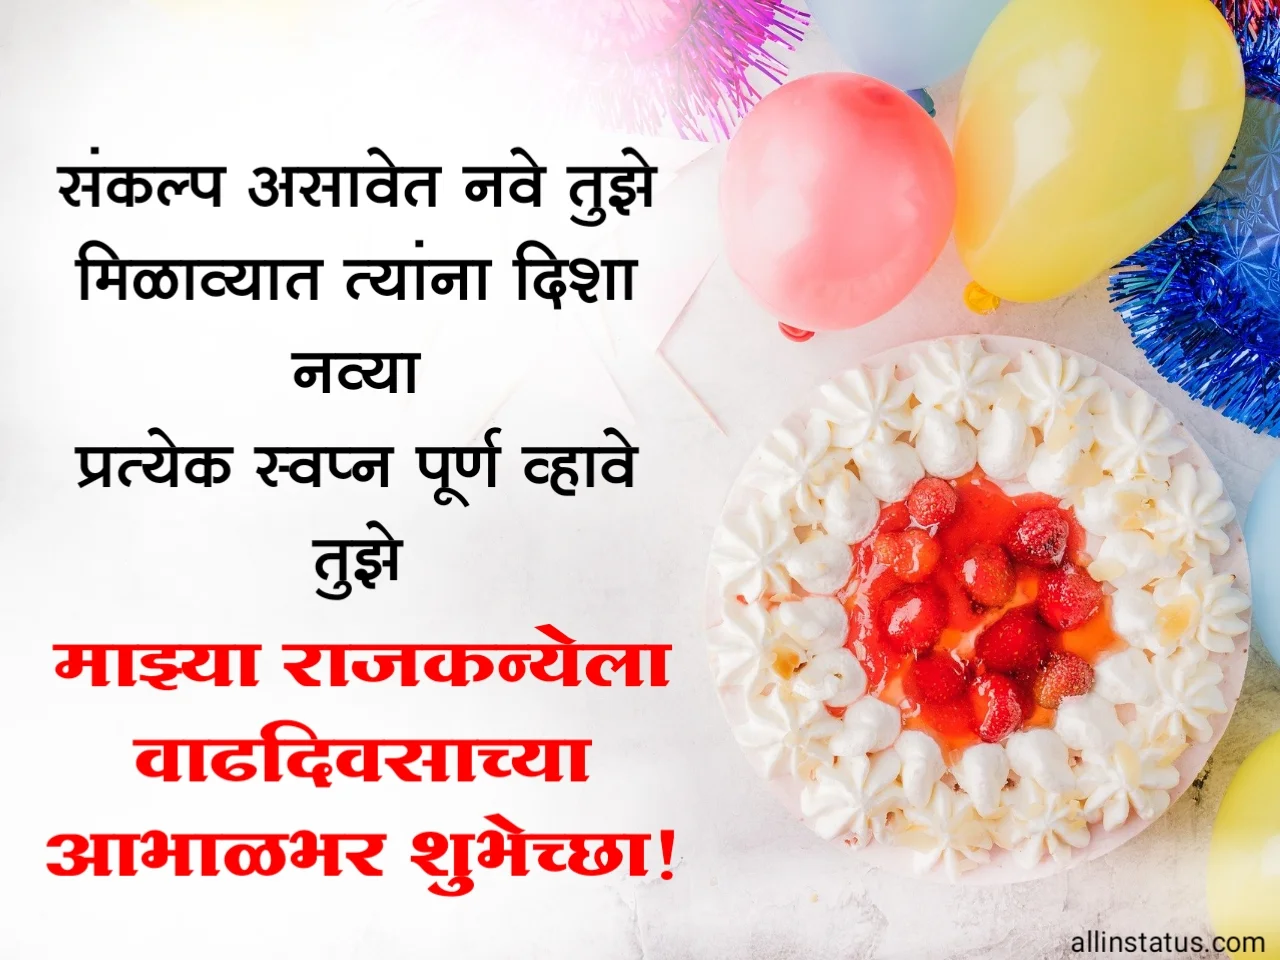 Happy Birthday wishes for daughter in Marathi